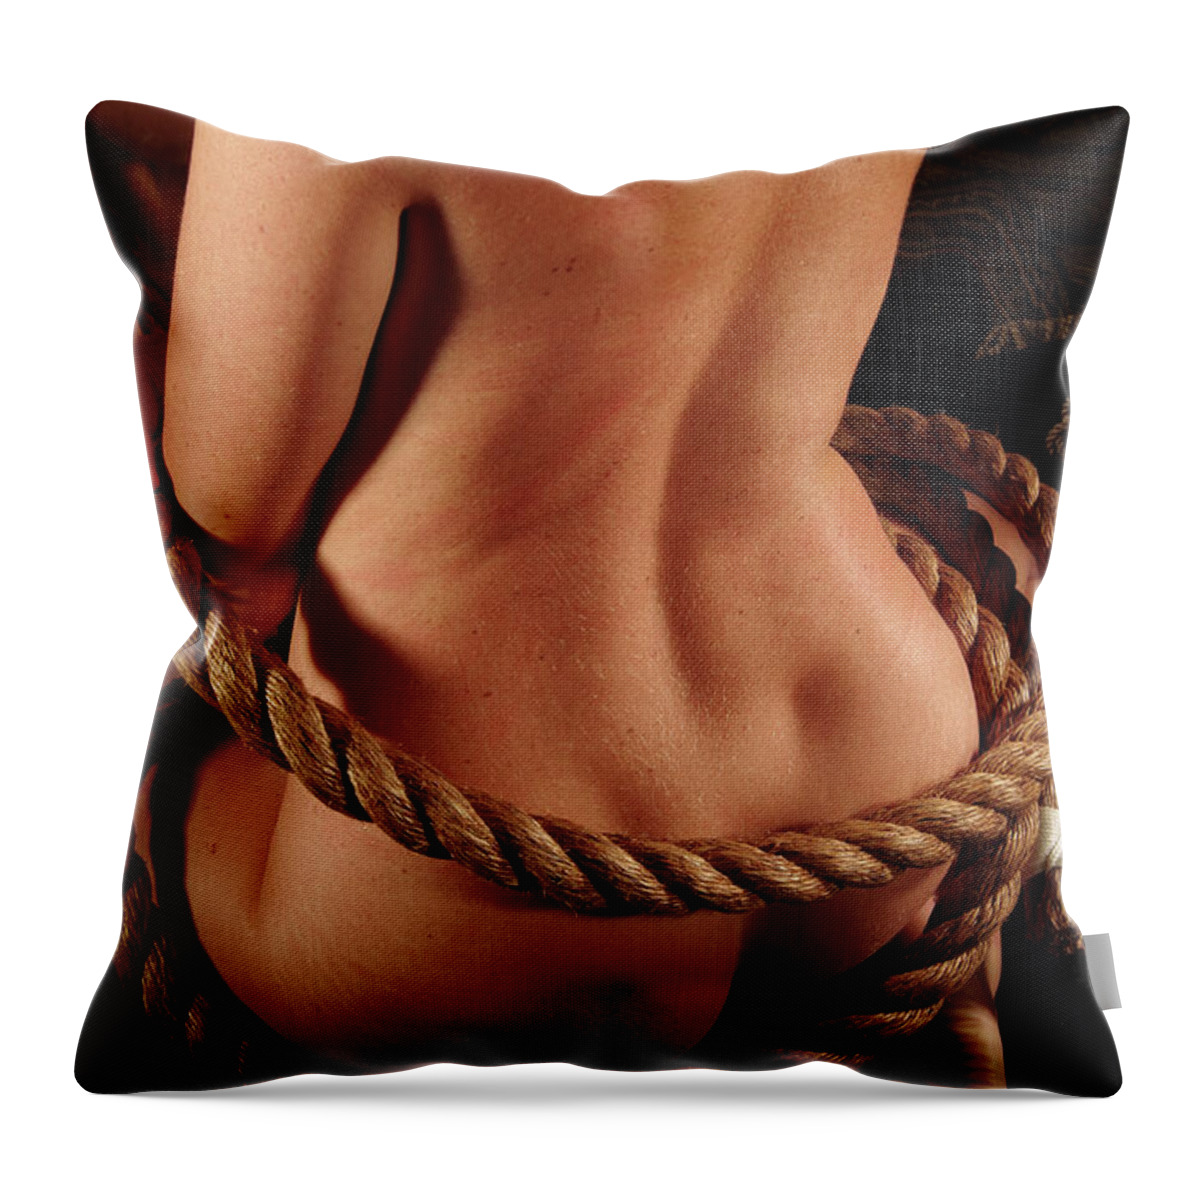 Nude Female Rope Throw Pillow featuring the photograph Kebu0930 by Henry Butz